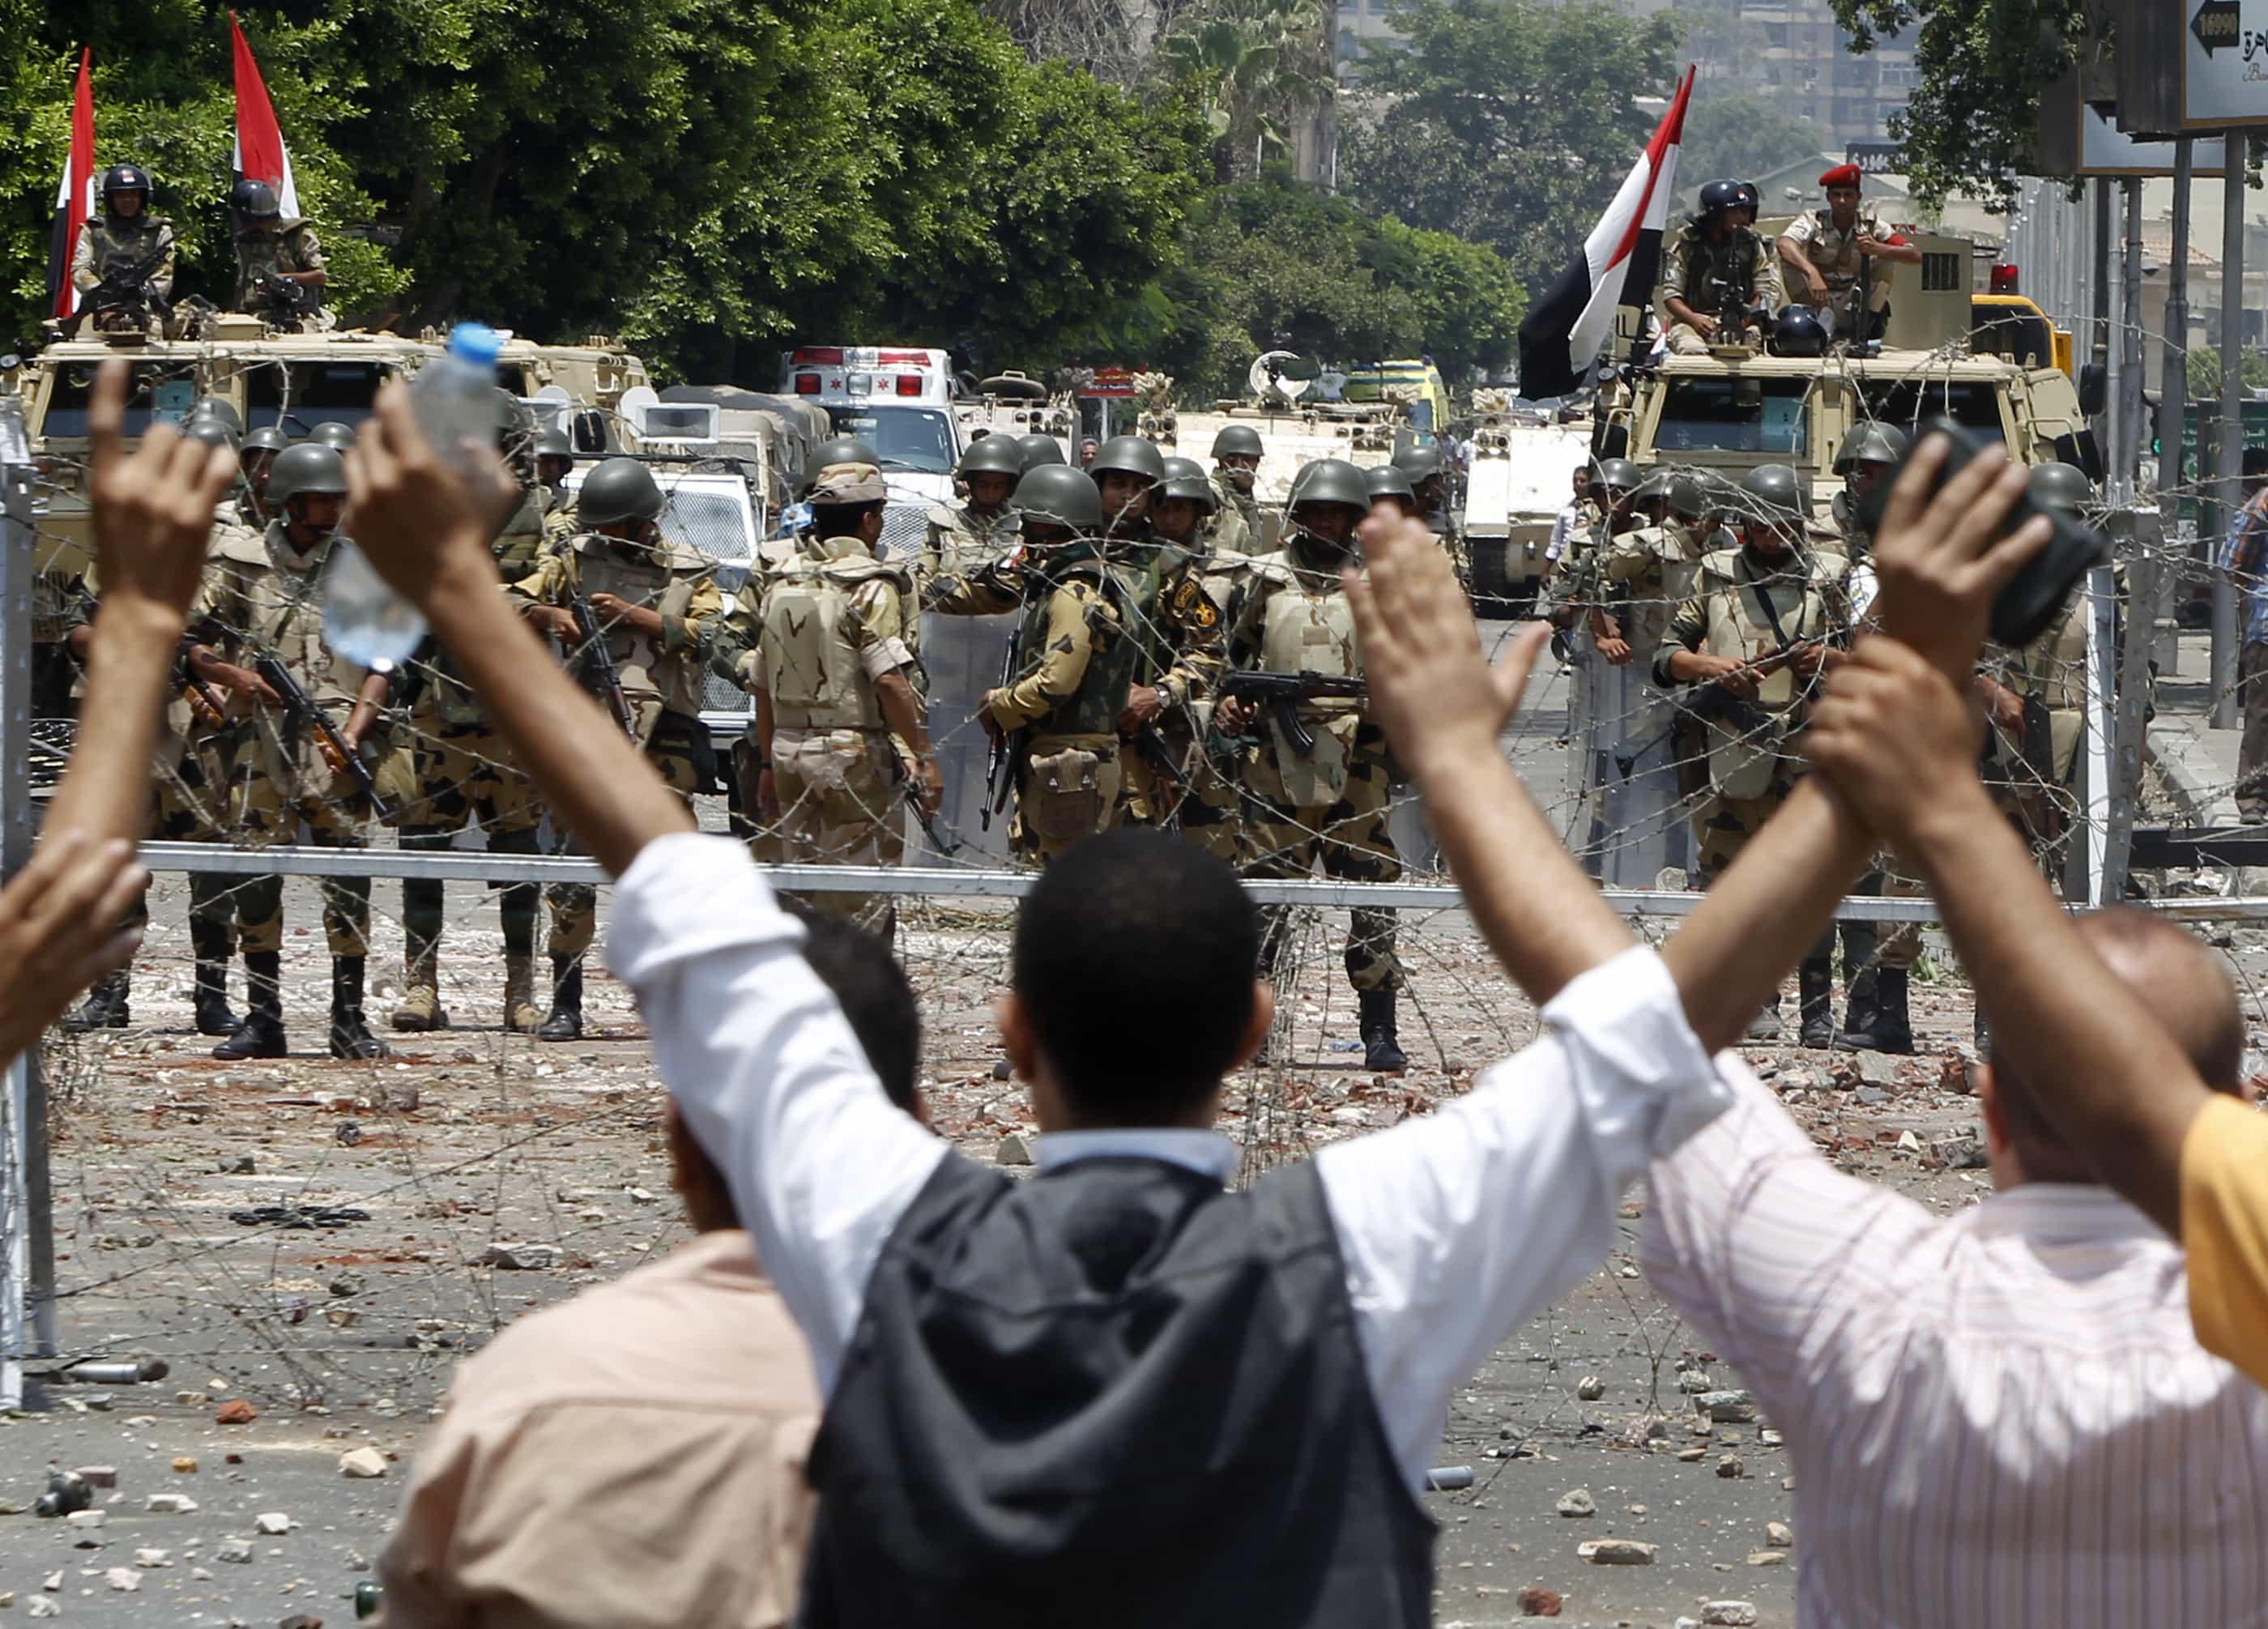 Supporters of the deposed Egyptian president shout slogans in front of army soldiers at Republican Guard headquarters in Cairo on 8 July 2013, REUTERS/Amr Abdallah Dalsh